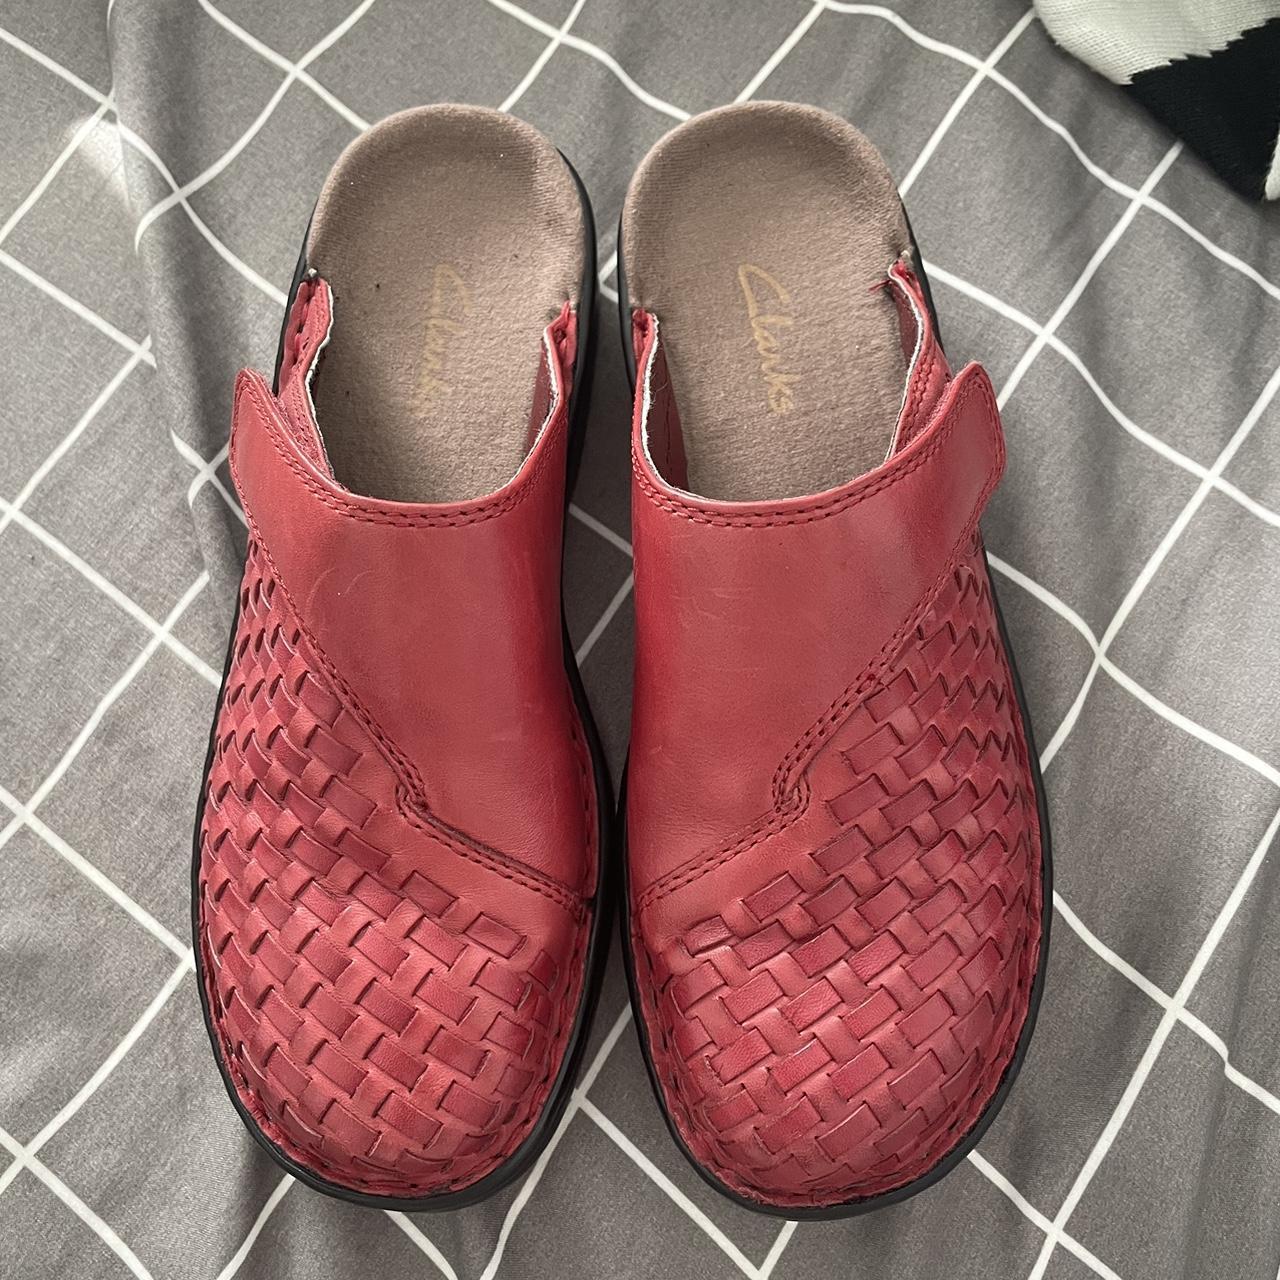 Clarks Women's Red Clogs (2)